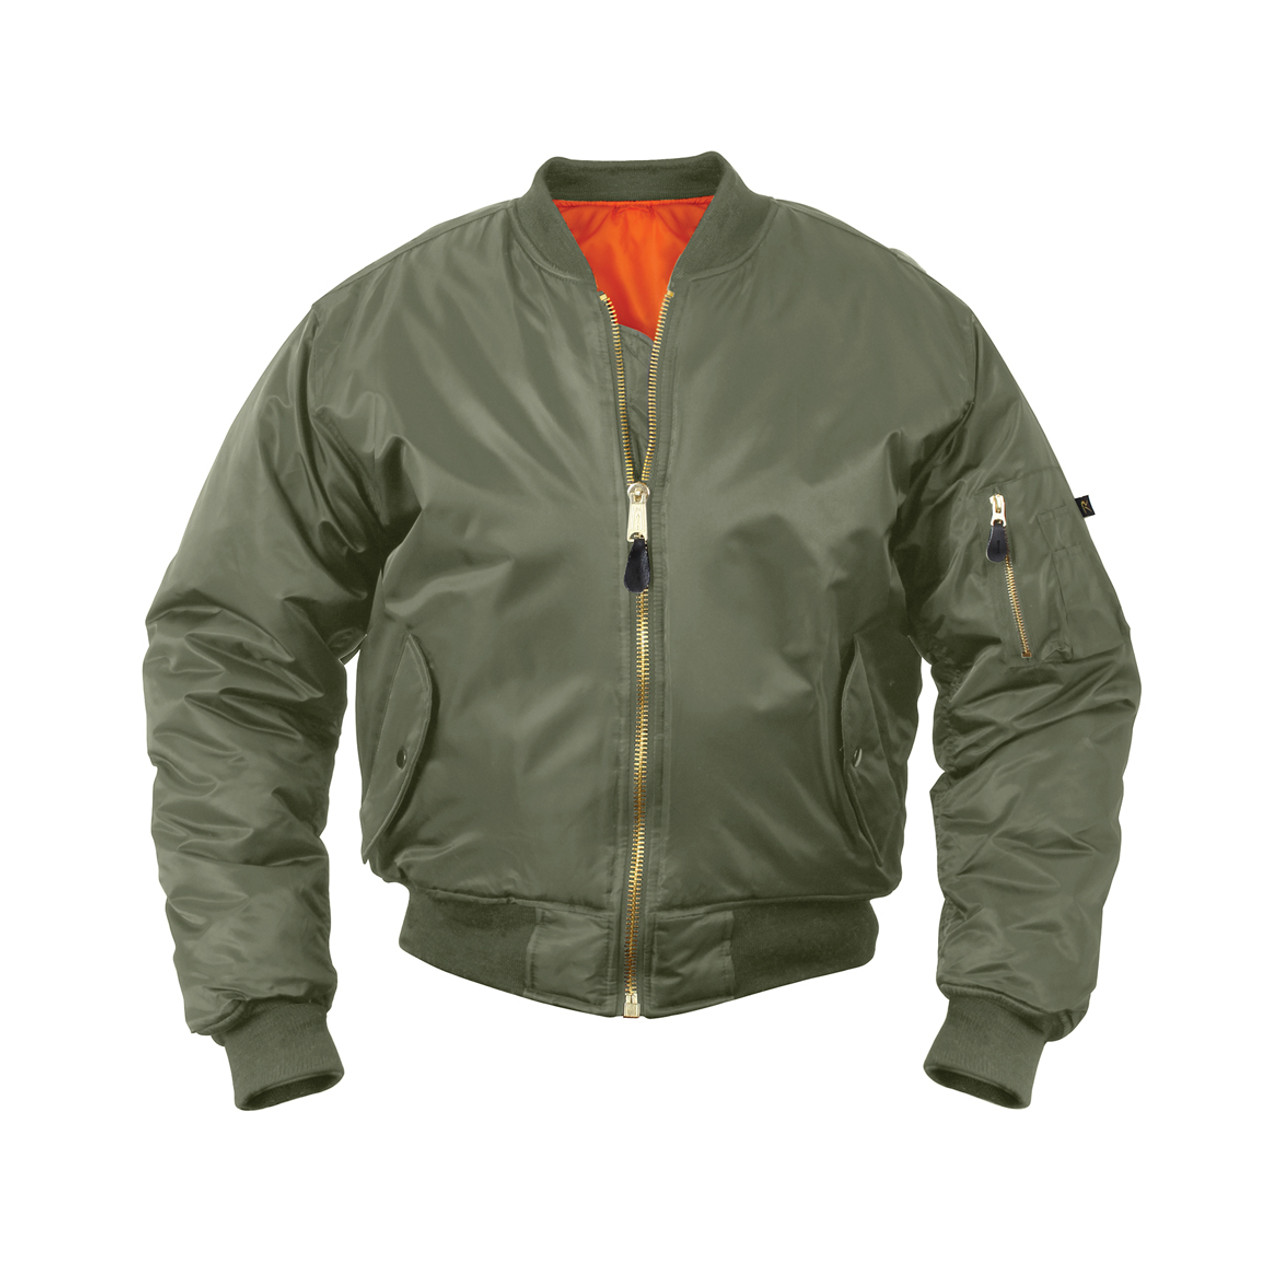 Shop Concealed Carry Sage Green MA-1 Flight Jackets - Fatigues